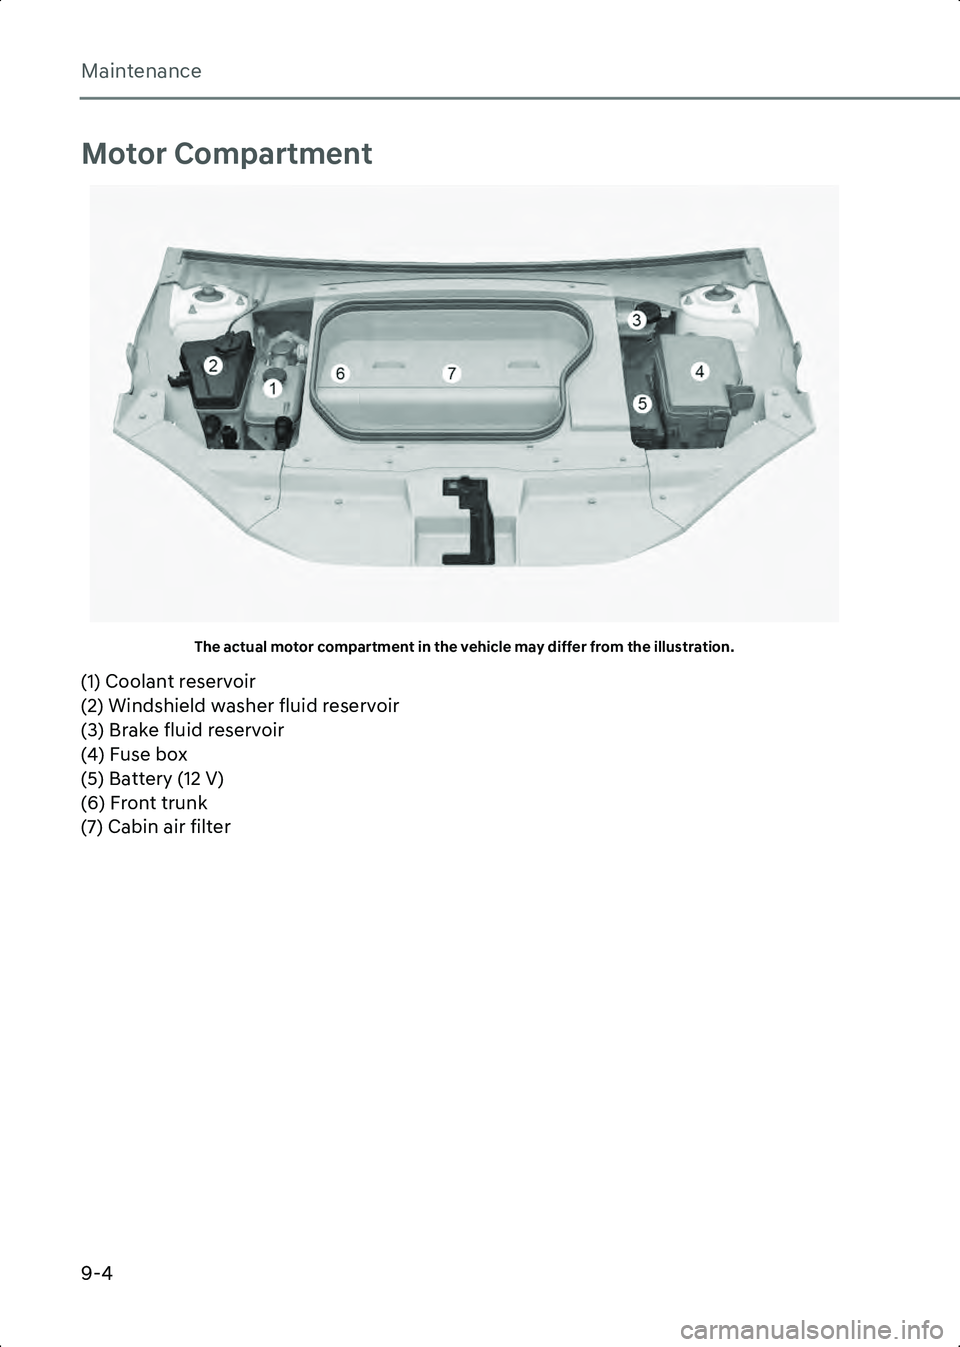 HYUNDAI IONIQ 6 2023  Owners Manual Maintenance
9-4
Motor Compartment
A1000901The actual motor compartment in the vehicle may differ from the illustration.
(1) Coolant reservoir
(2) Windshield washer fluid reservoir
(3) Brake fluid rese